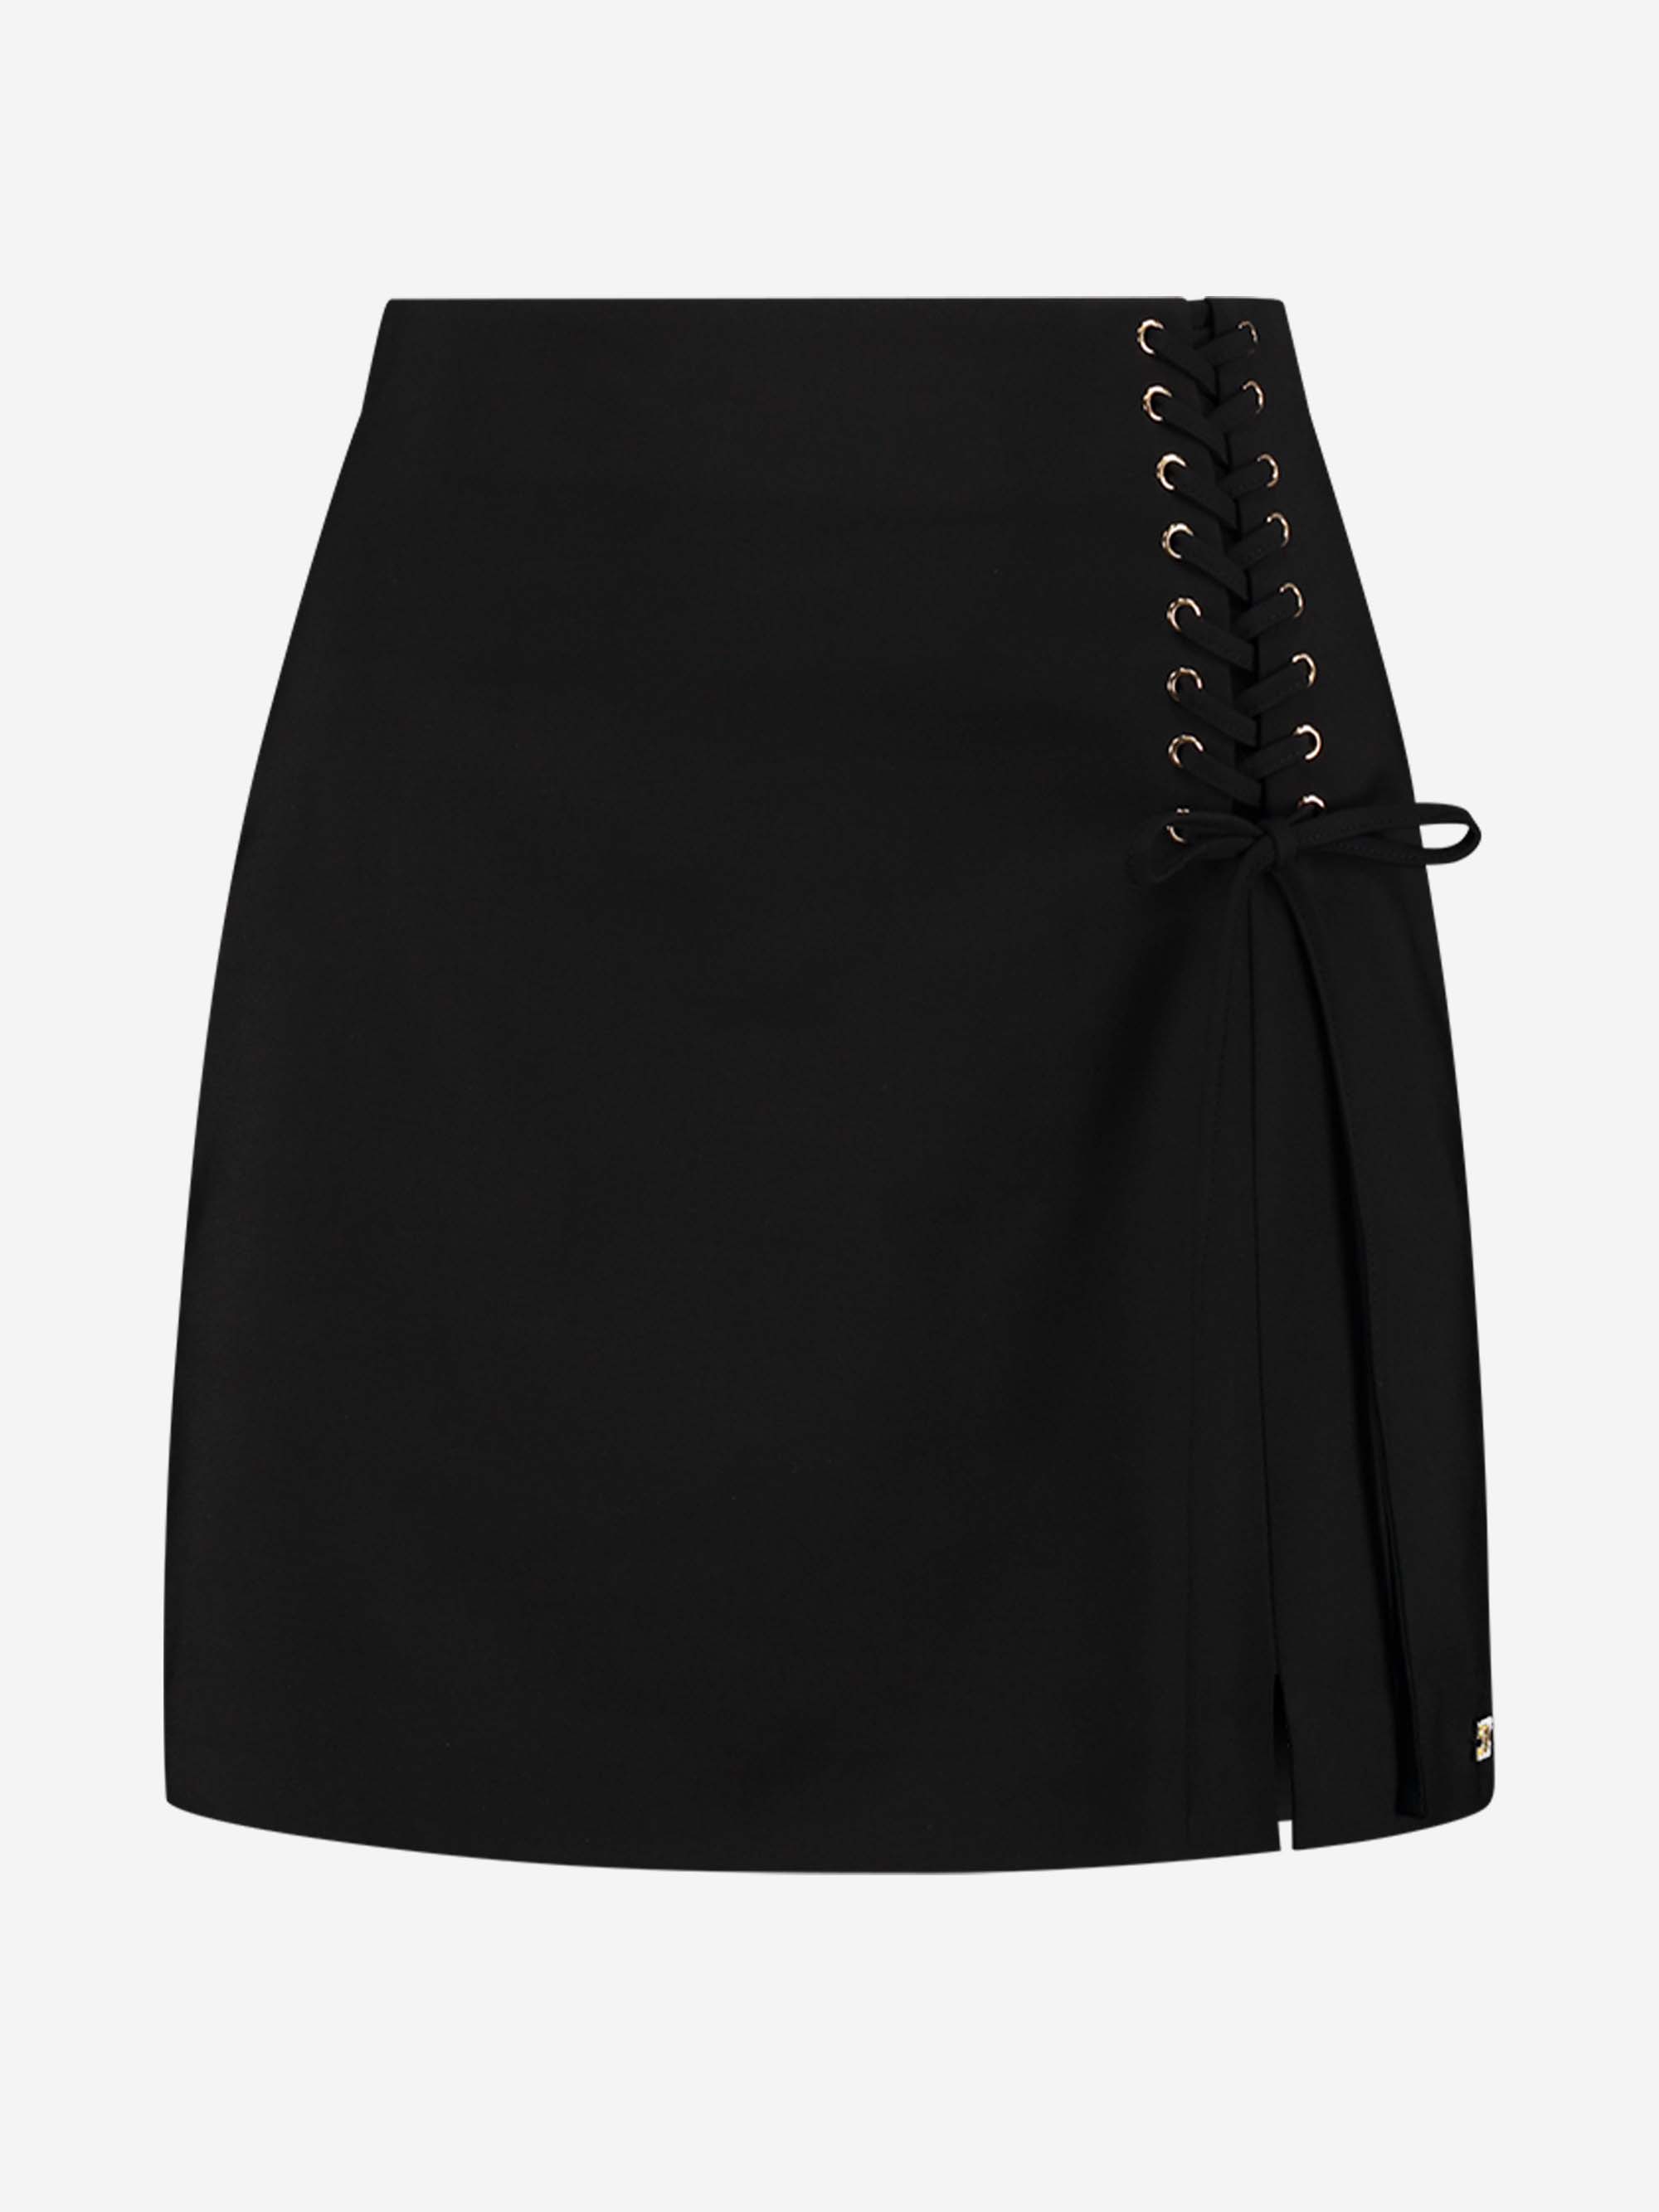 Lizzy Lace-up Skirt